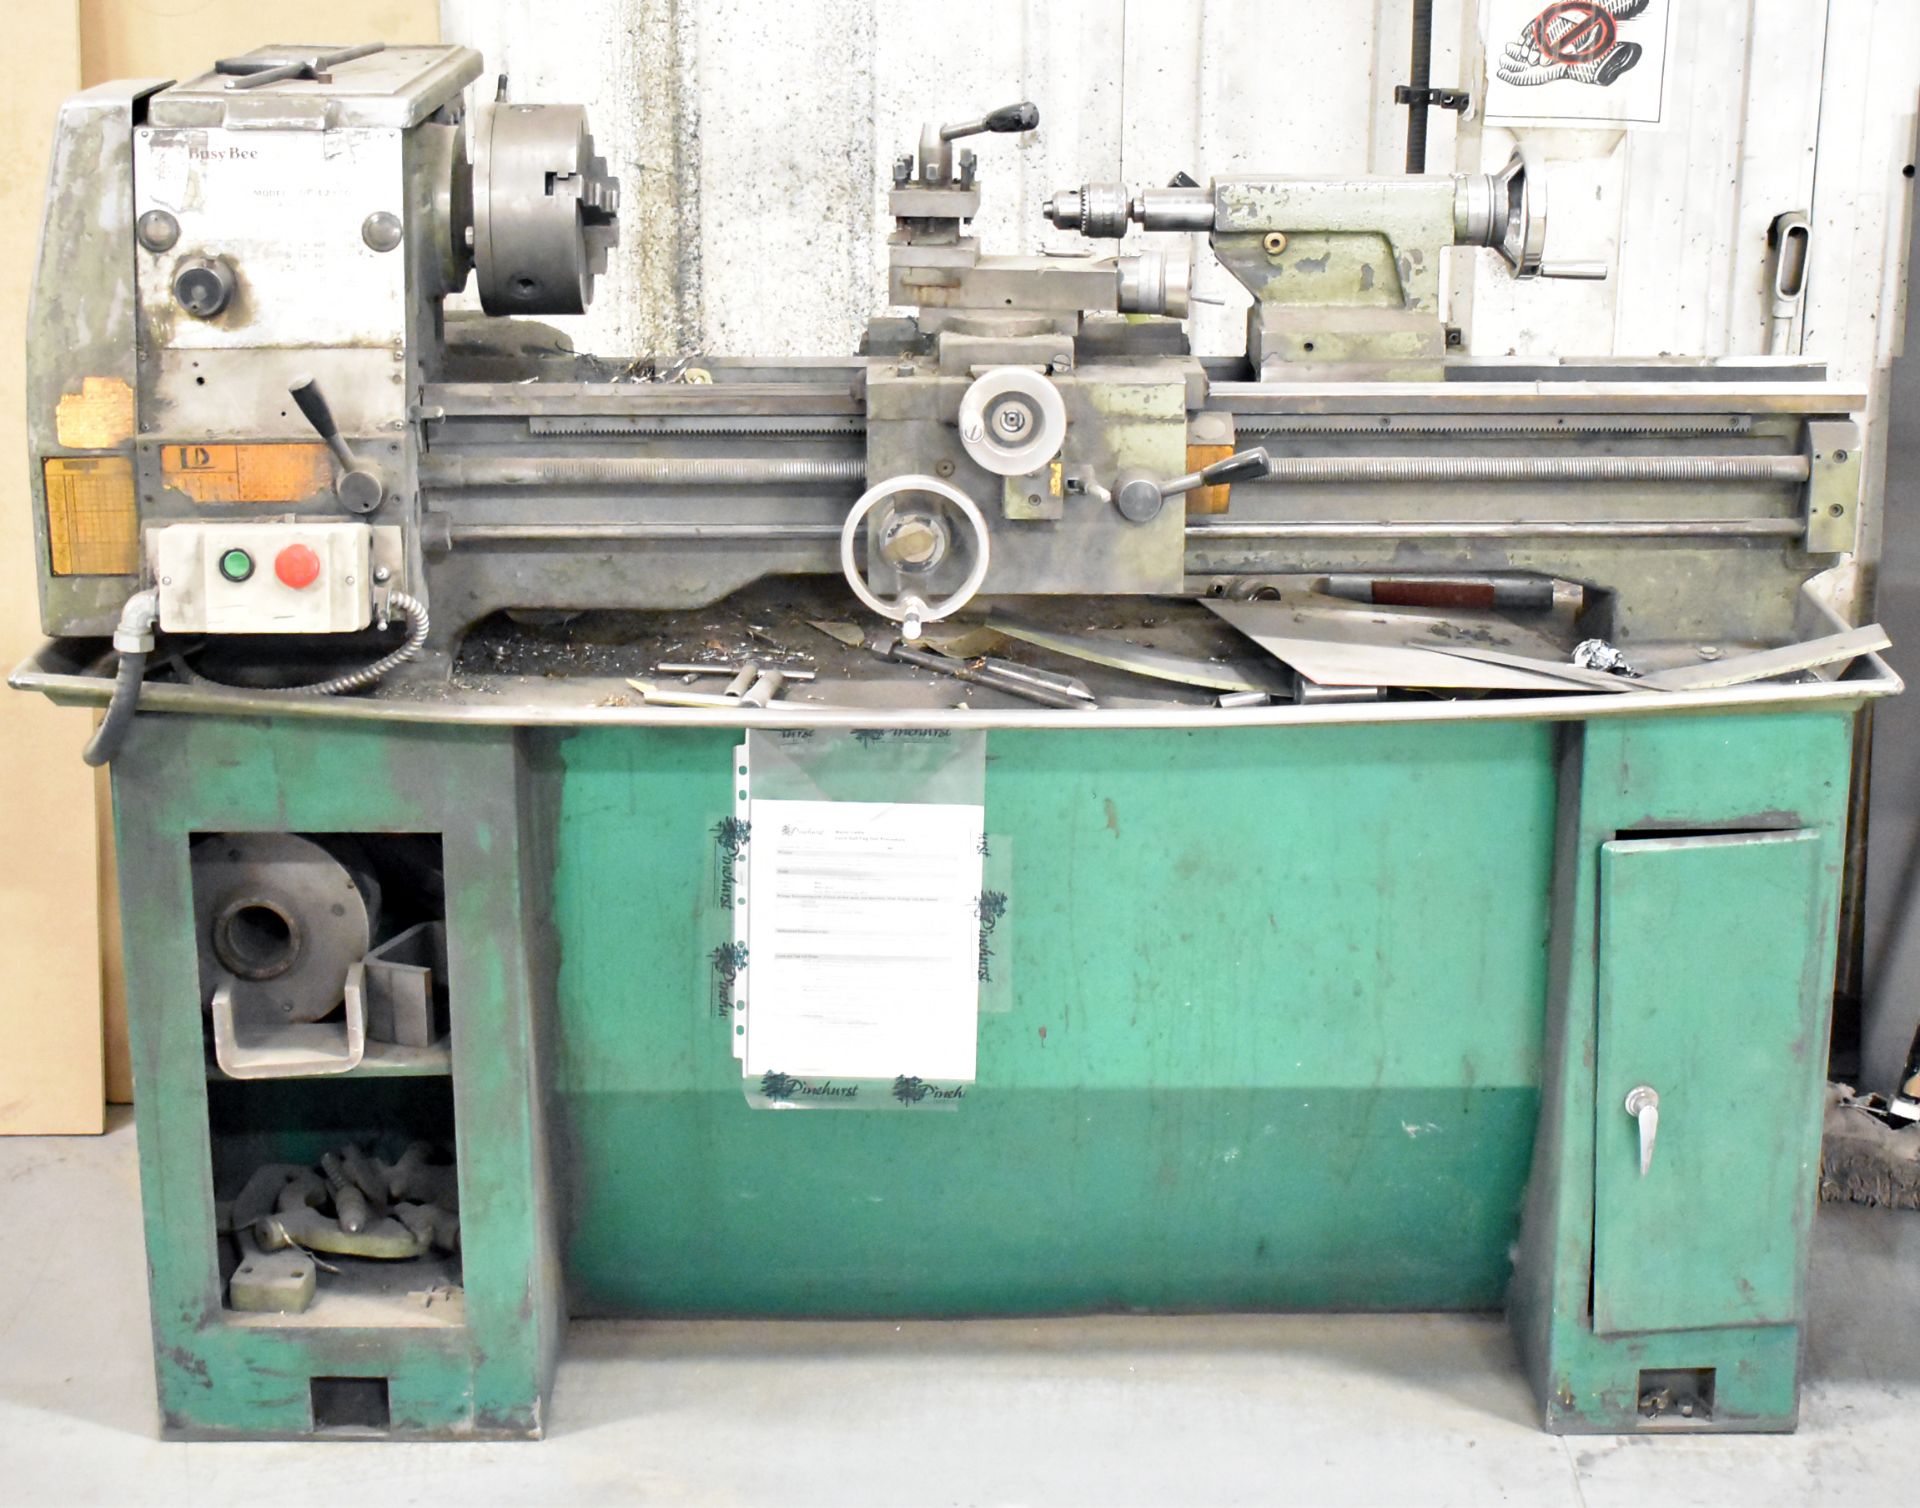 BUSY BEE DF-1237G GAP BED LATHE WITH 12" SWING, 37" BETWEEN CENTERS, AND 7.5" 3-JAW CHUCK, S/N: N/A